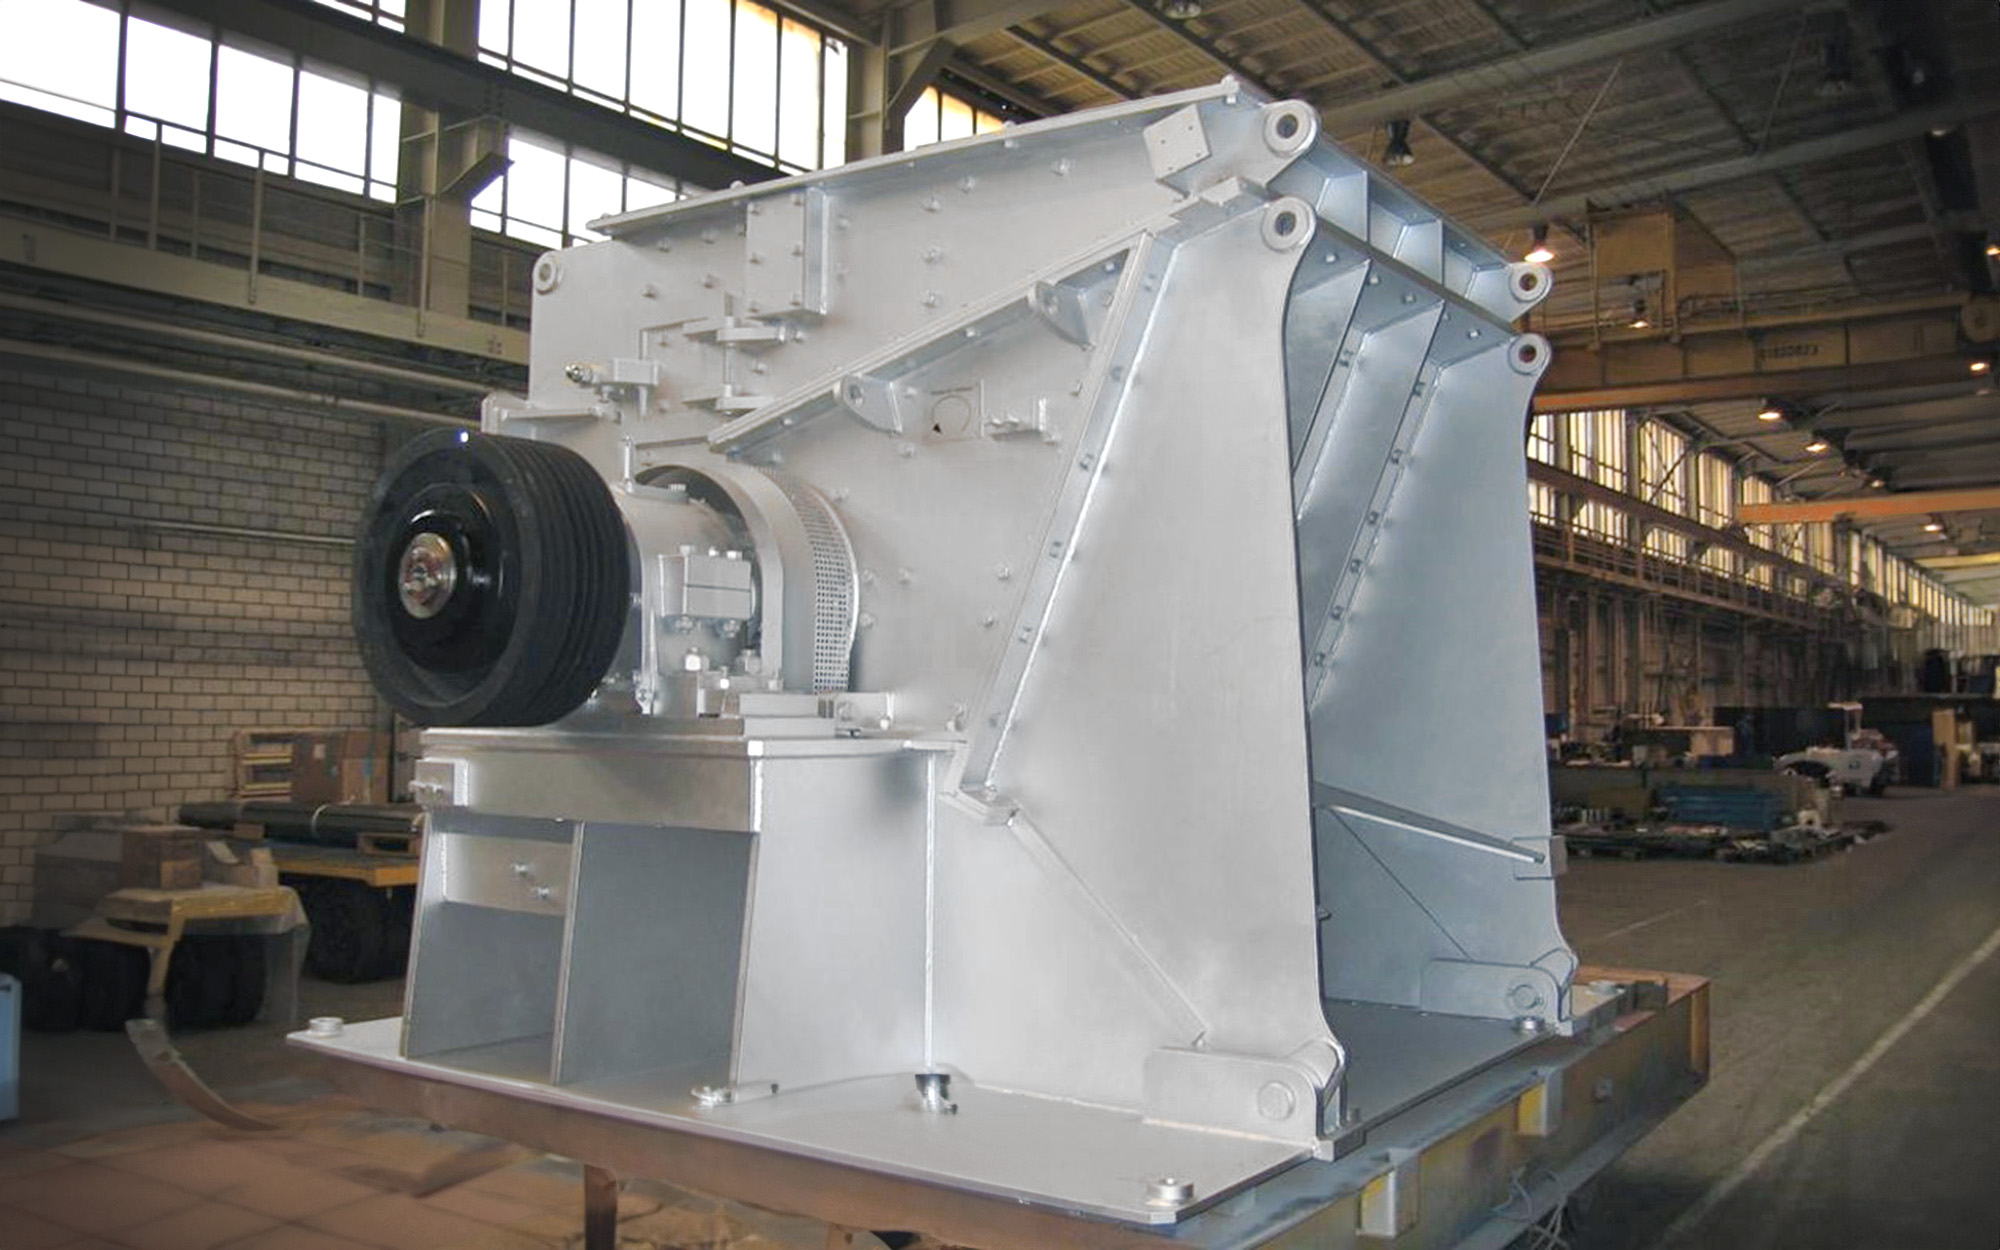 The hammer mill plays a crucial role in the calcination process